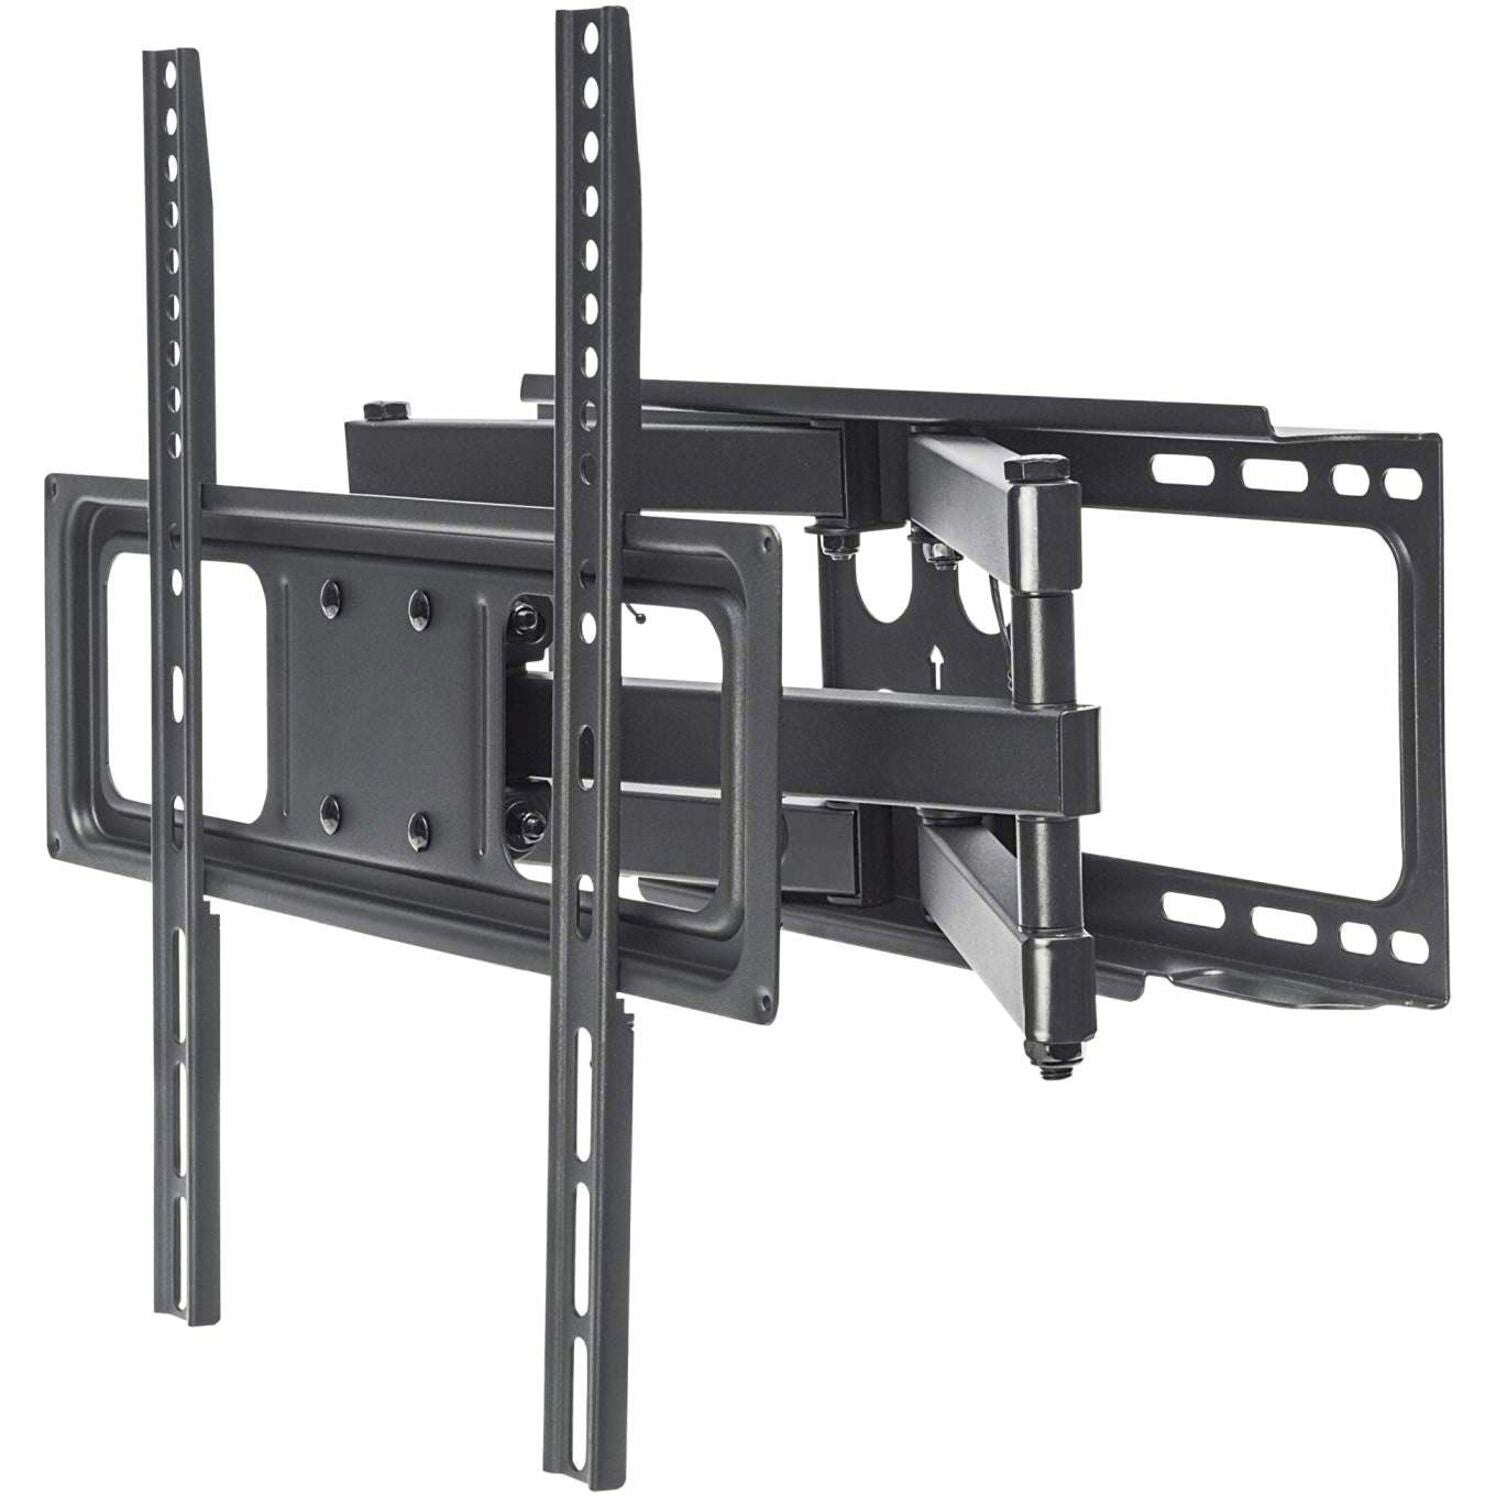 Manhattan 461344 Universal Basic LCD Full-Motion Wall Mount, Supports TVs up to 55", 88 lb Capacity